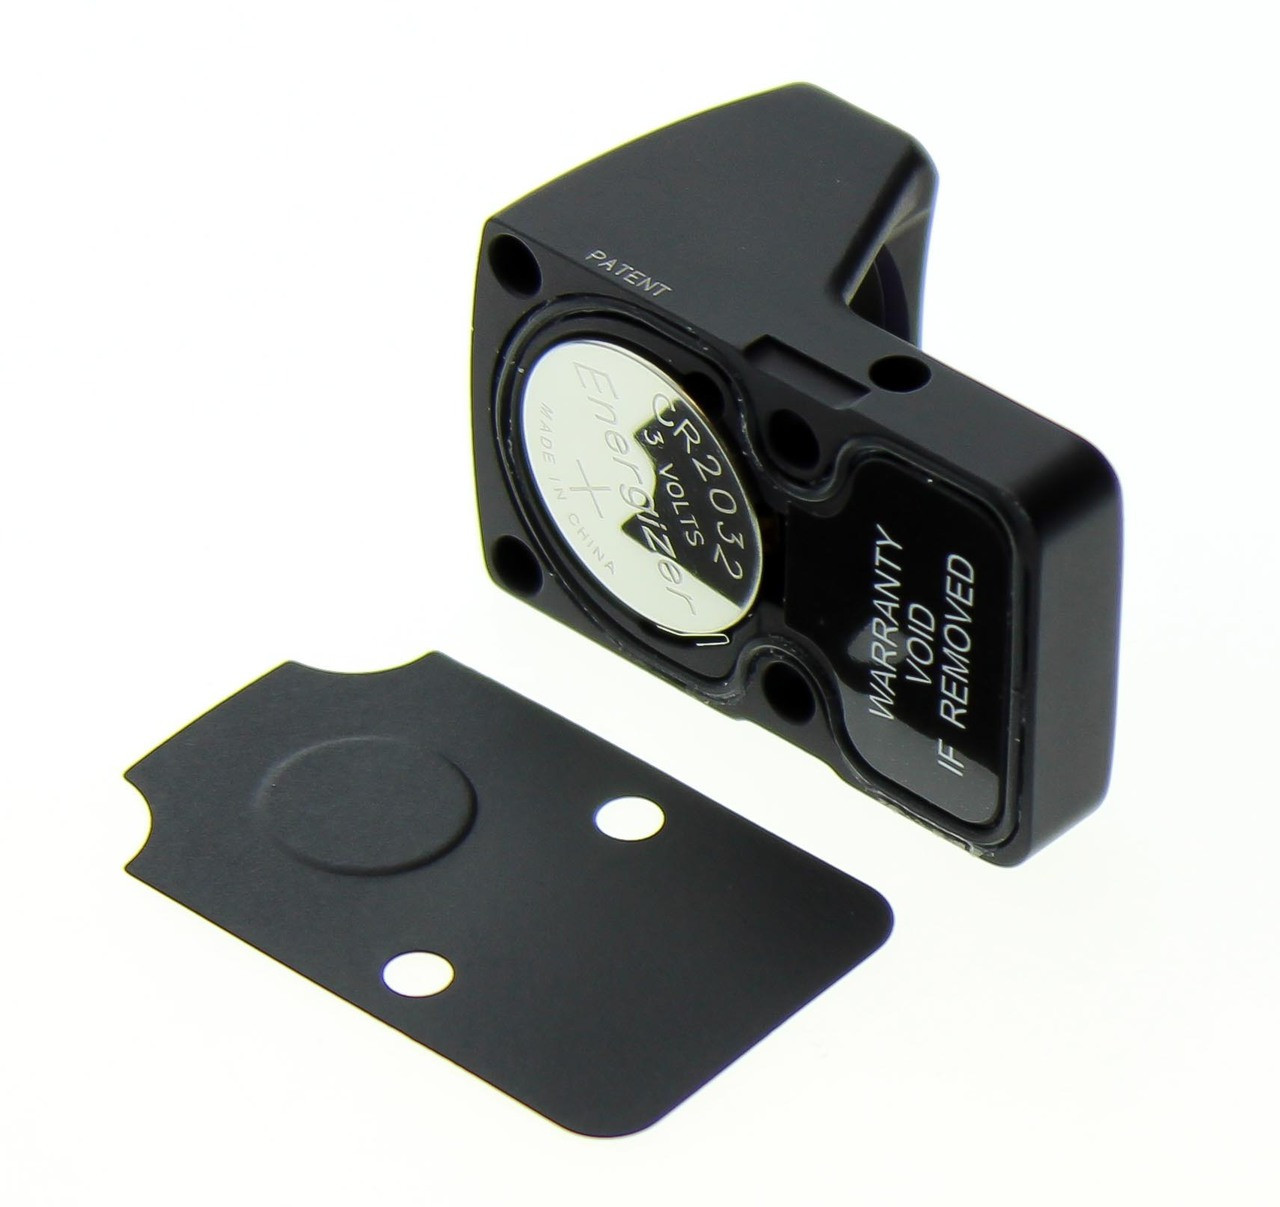 Battle Werx Anti Flicker Sealing Plate for Trijicon RMR to fix battery connection leading to flickering reticle